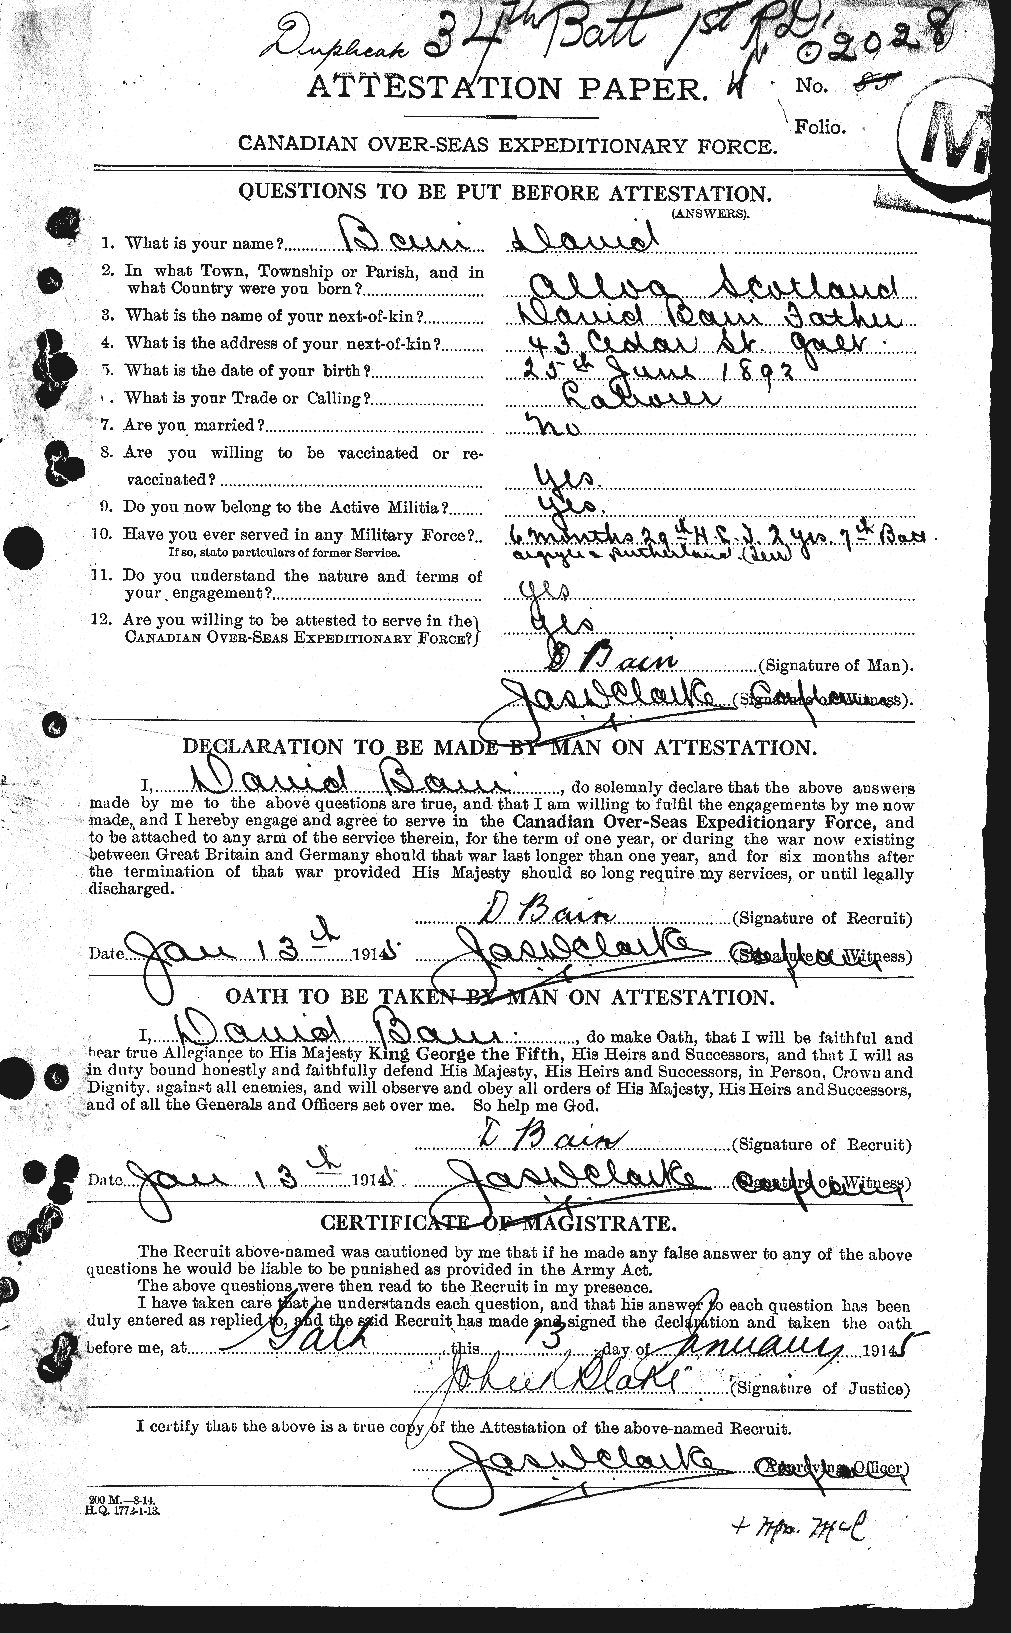 Personnel Records of the First World War - CEF 226154a